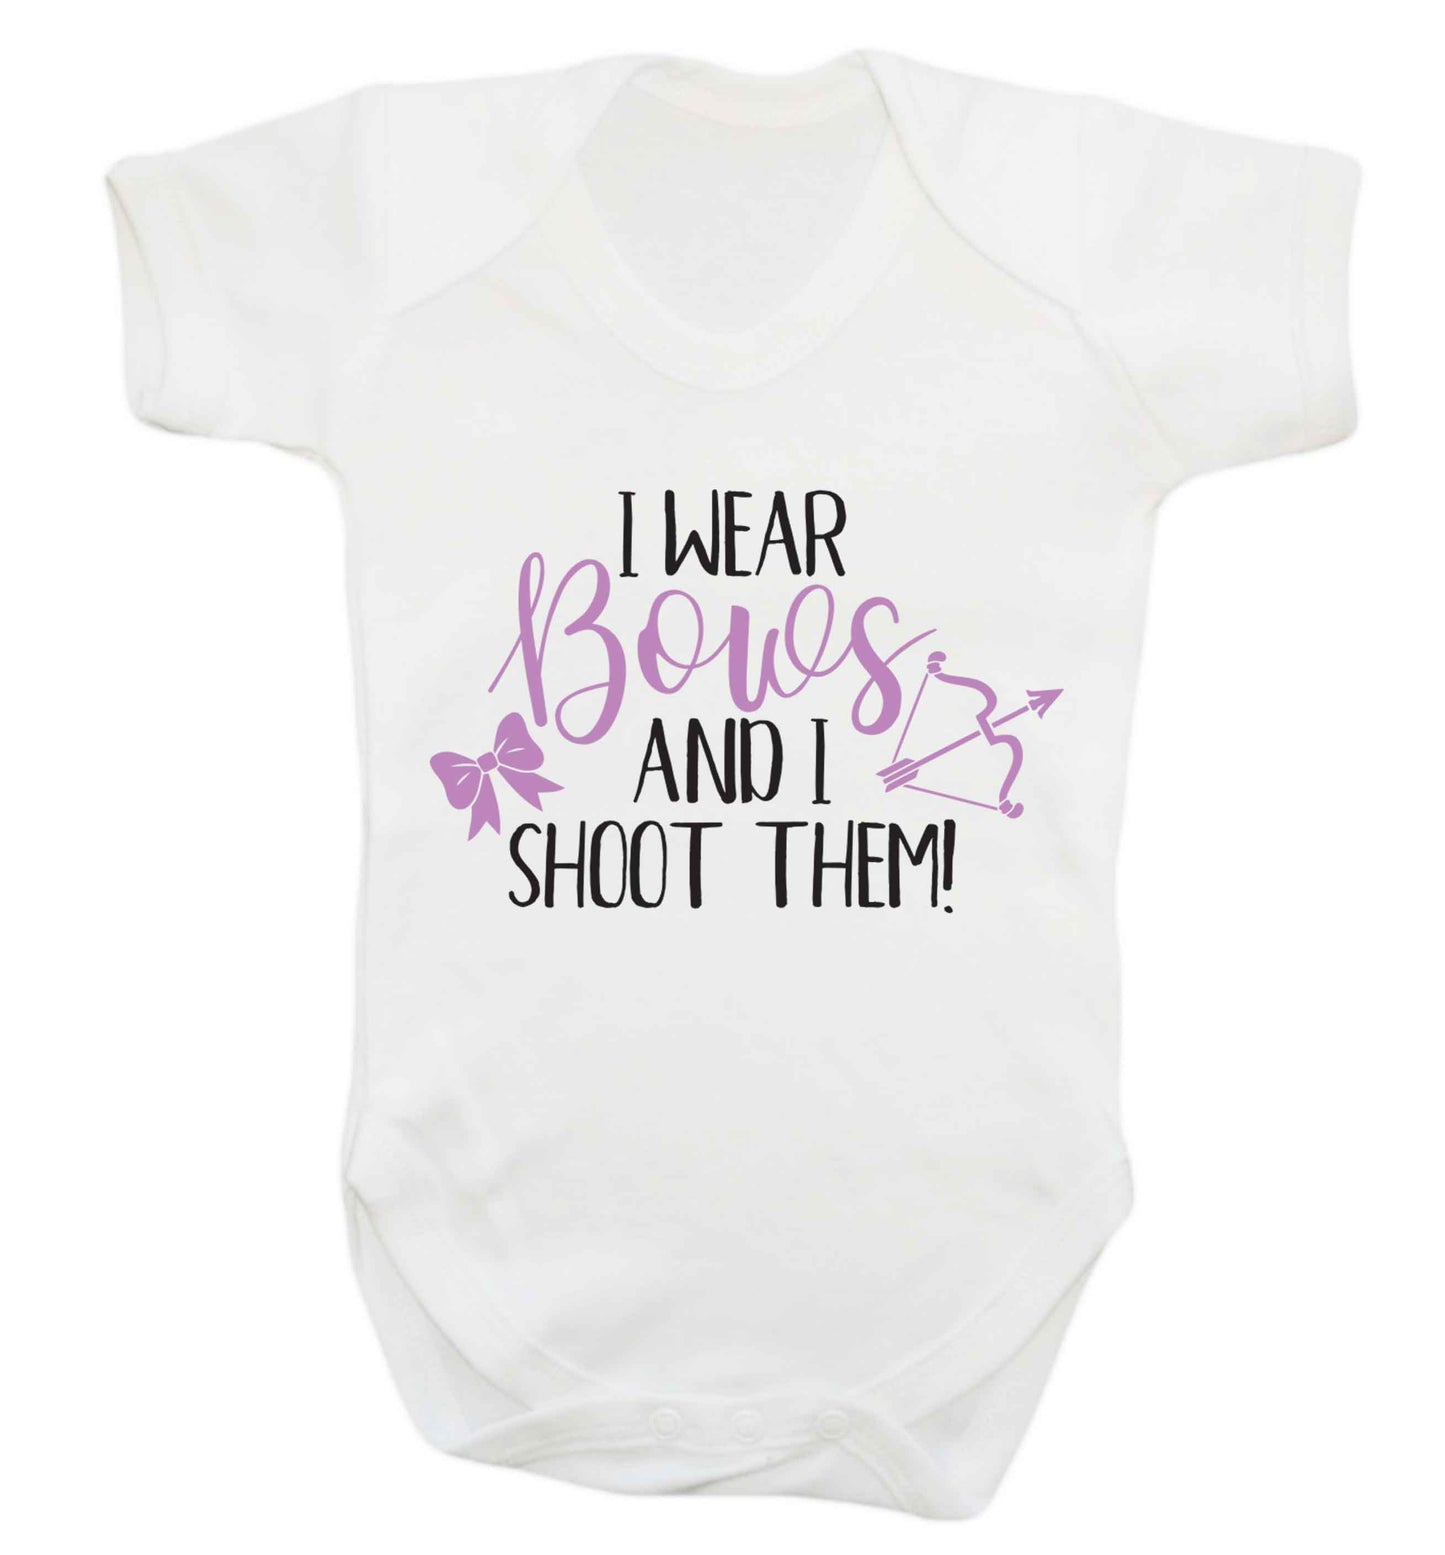 I wear bows and I shoot them Baby Vest white 18-24 months